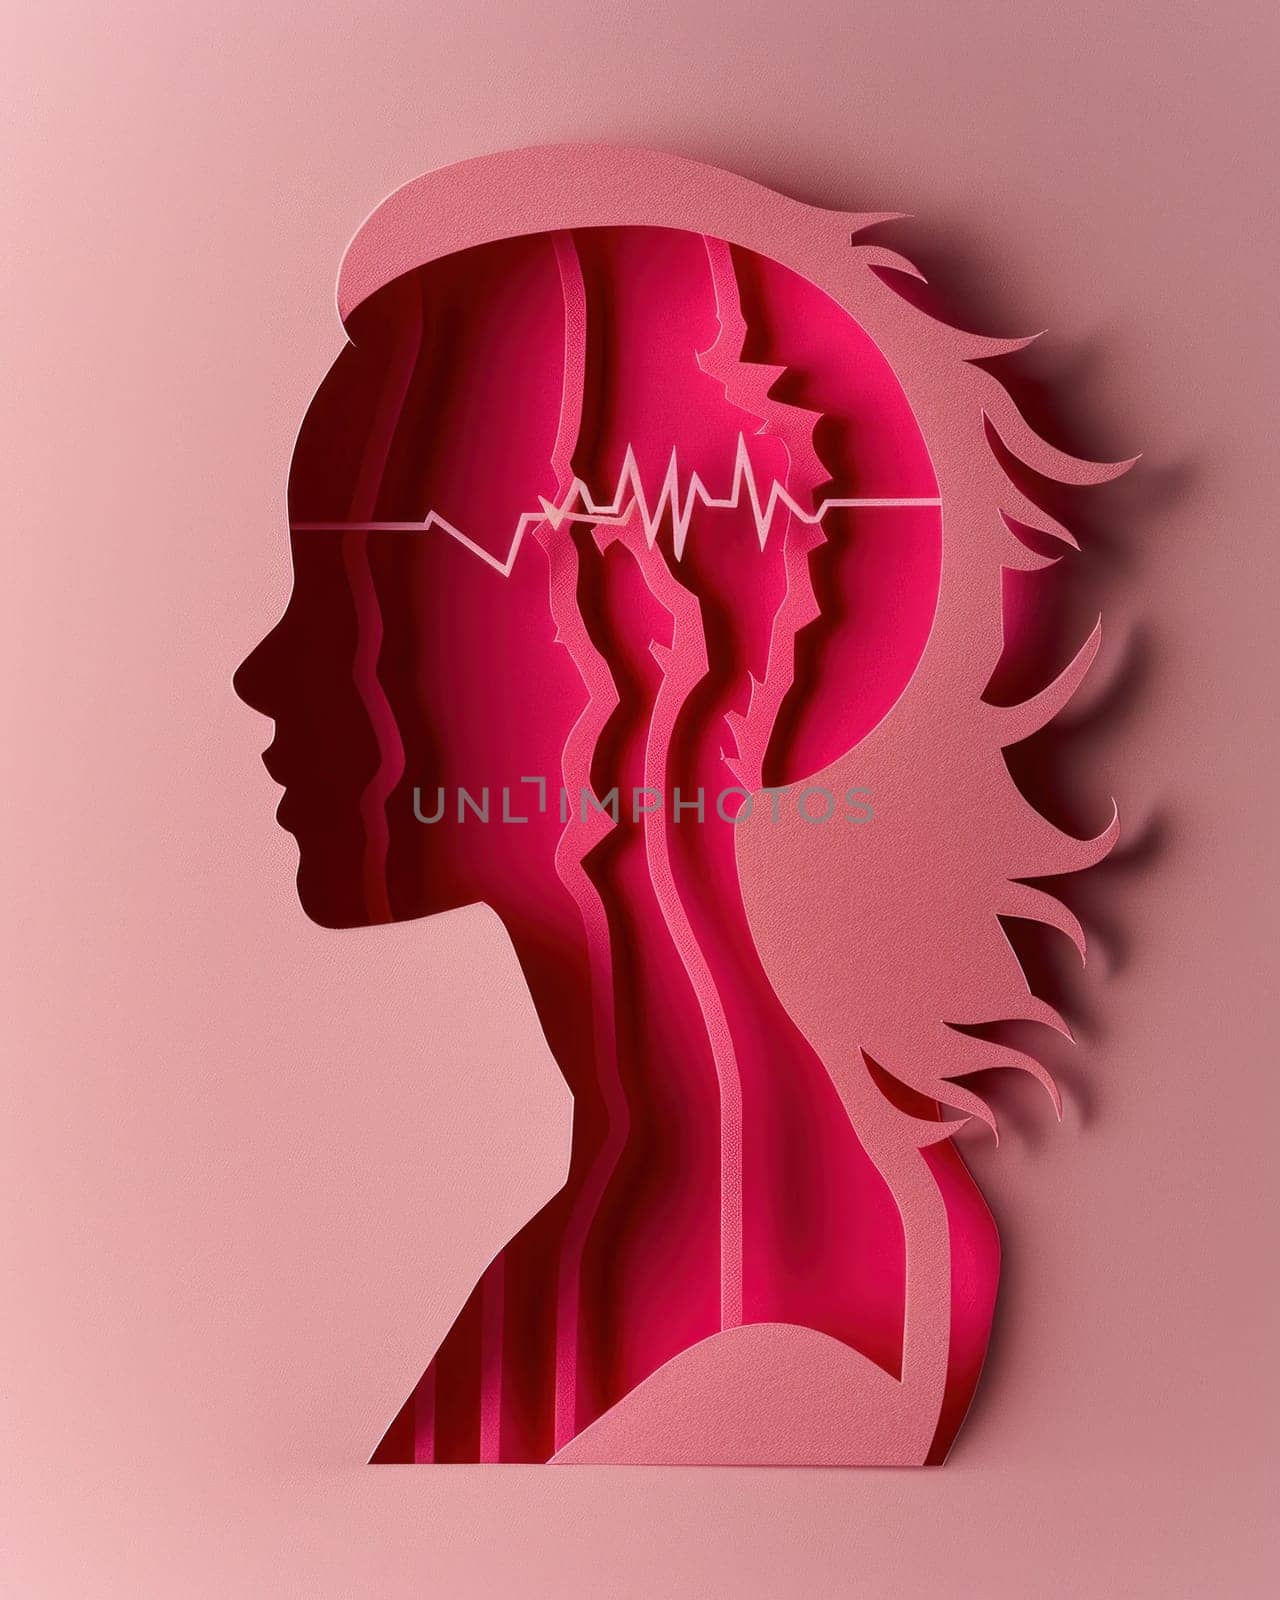 Anatomy of emotions woman's head paper cut with ecg line representing medical, mental health and emotions concept